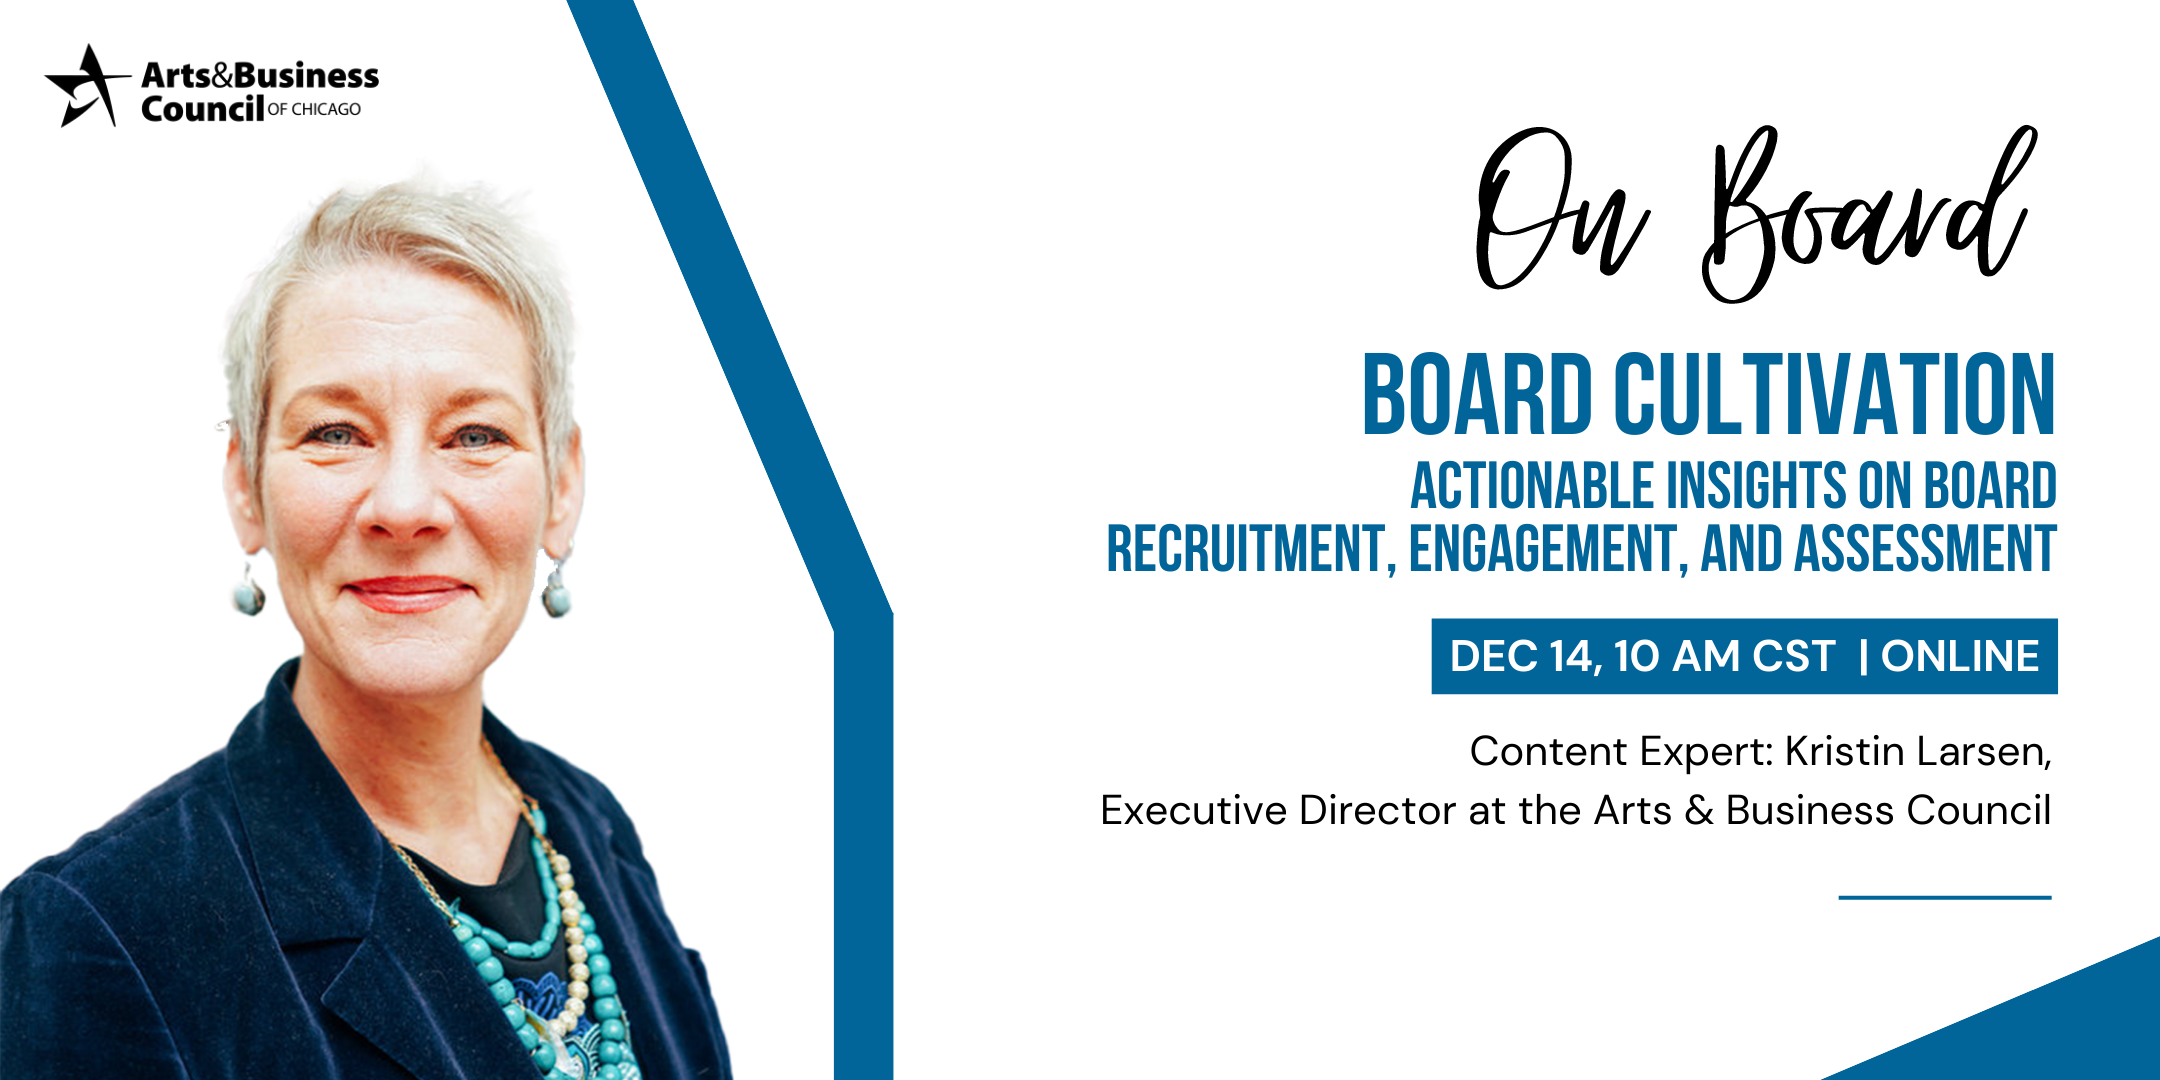 On BOARD 2022: Board Cultivation. Actionable Insights on Board Recruitment, Engagement & Assessment @ Online